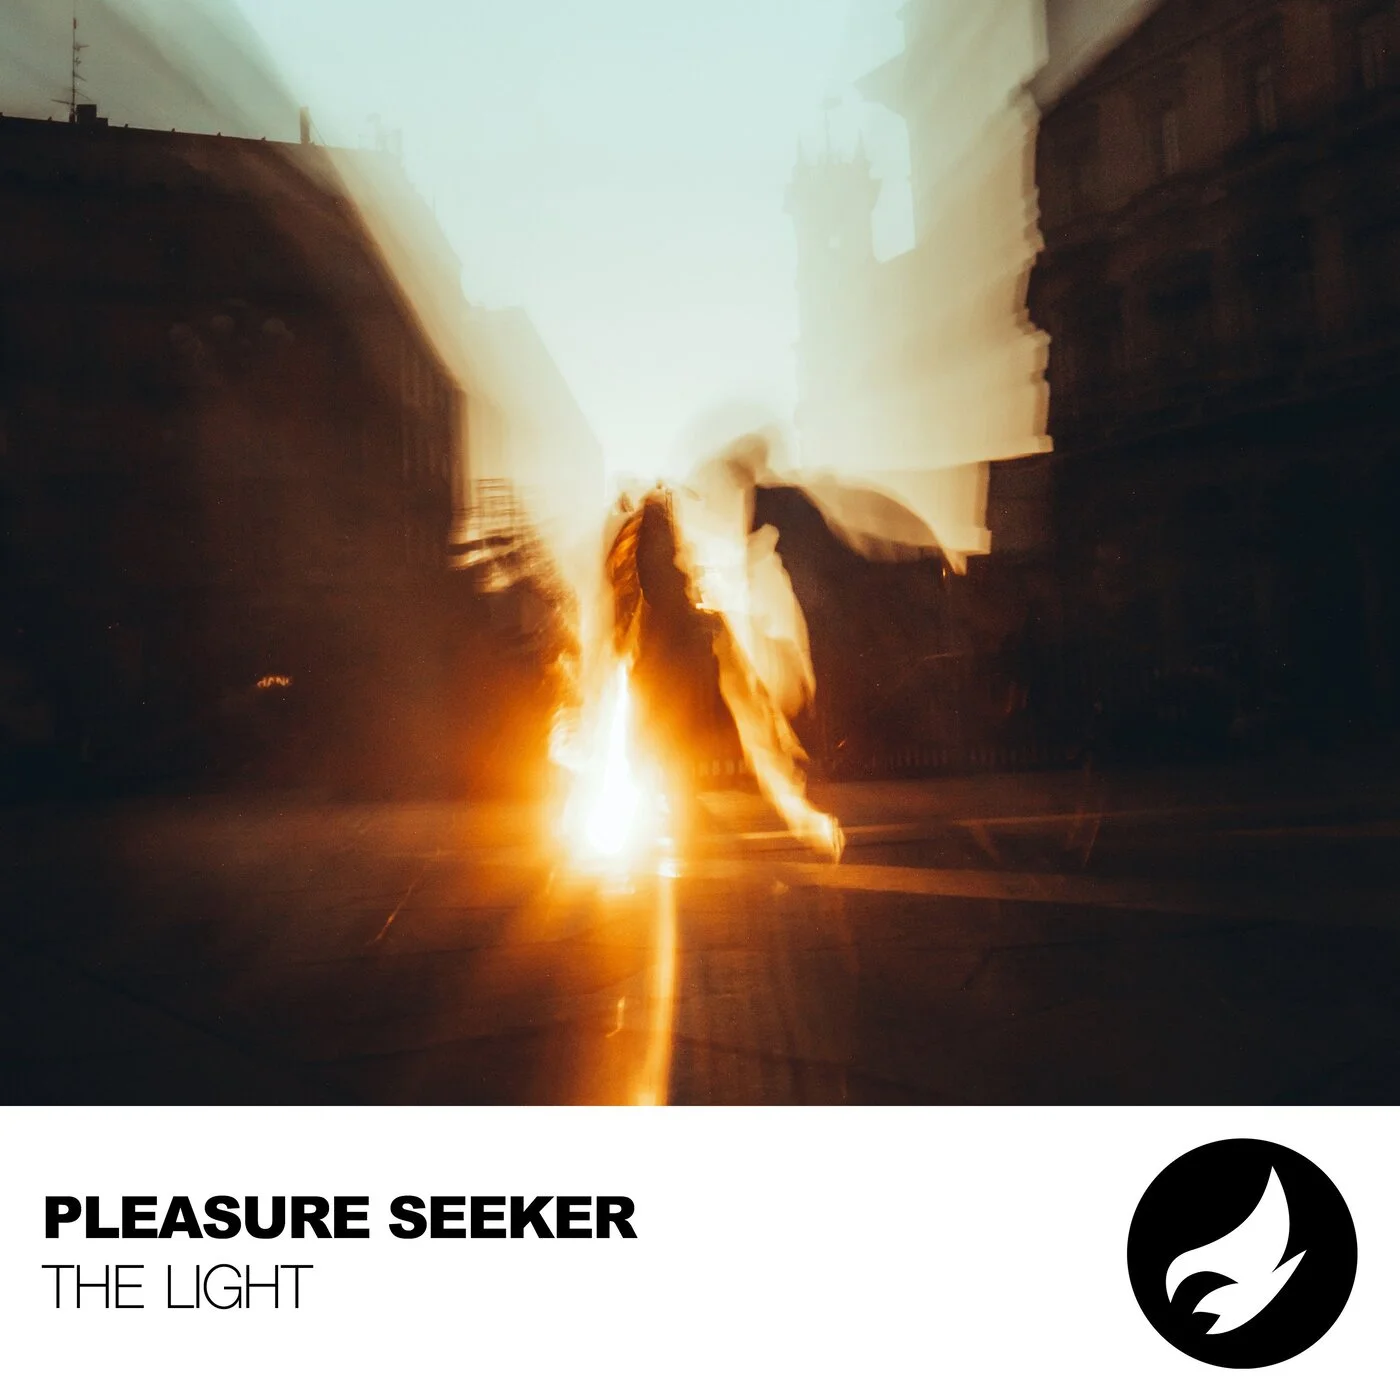 Pleasure Seeker, the rising DJ and producer, has released his latest track called The Light